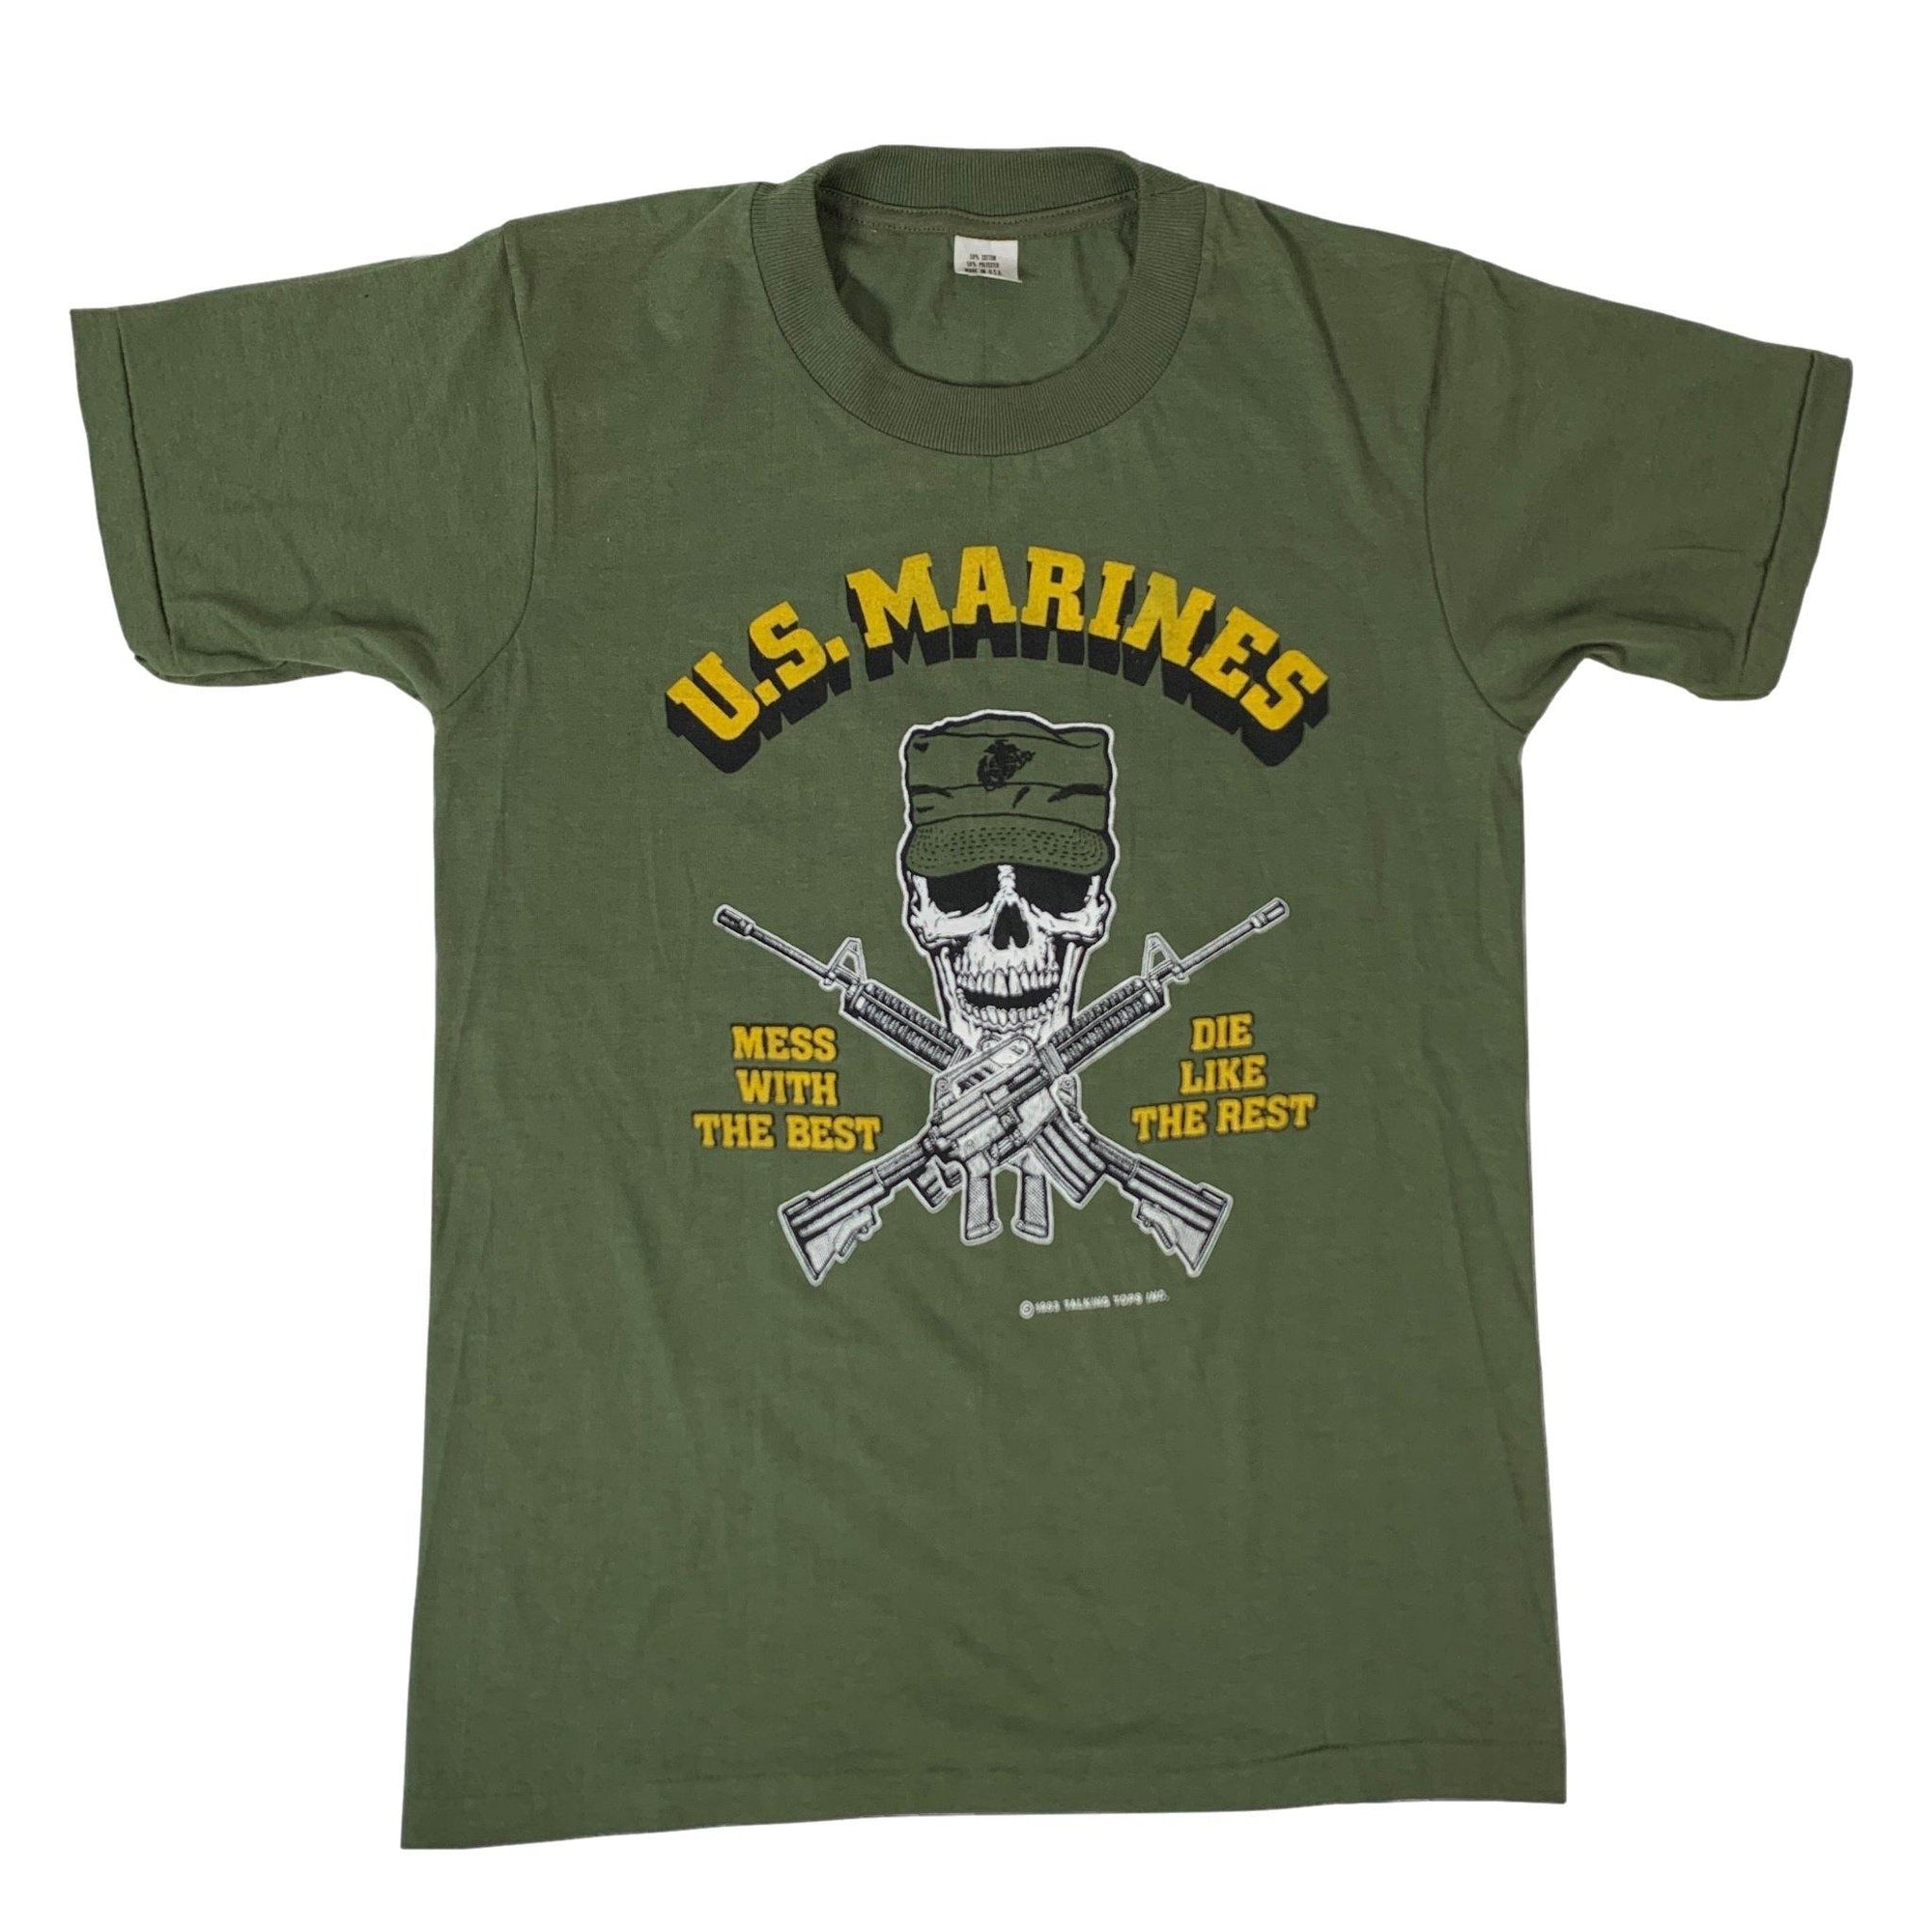 Vintage U.S. Marines "Mess With The Best" T-Shirt - jointcustodydc